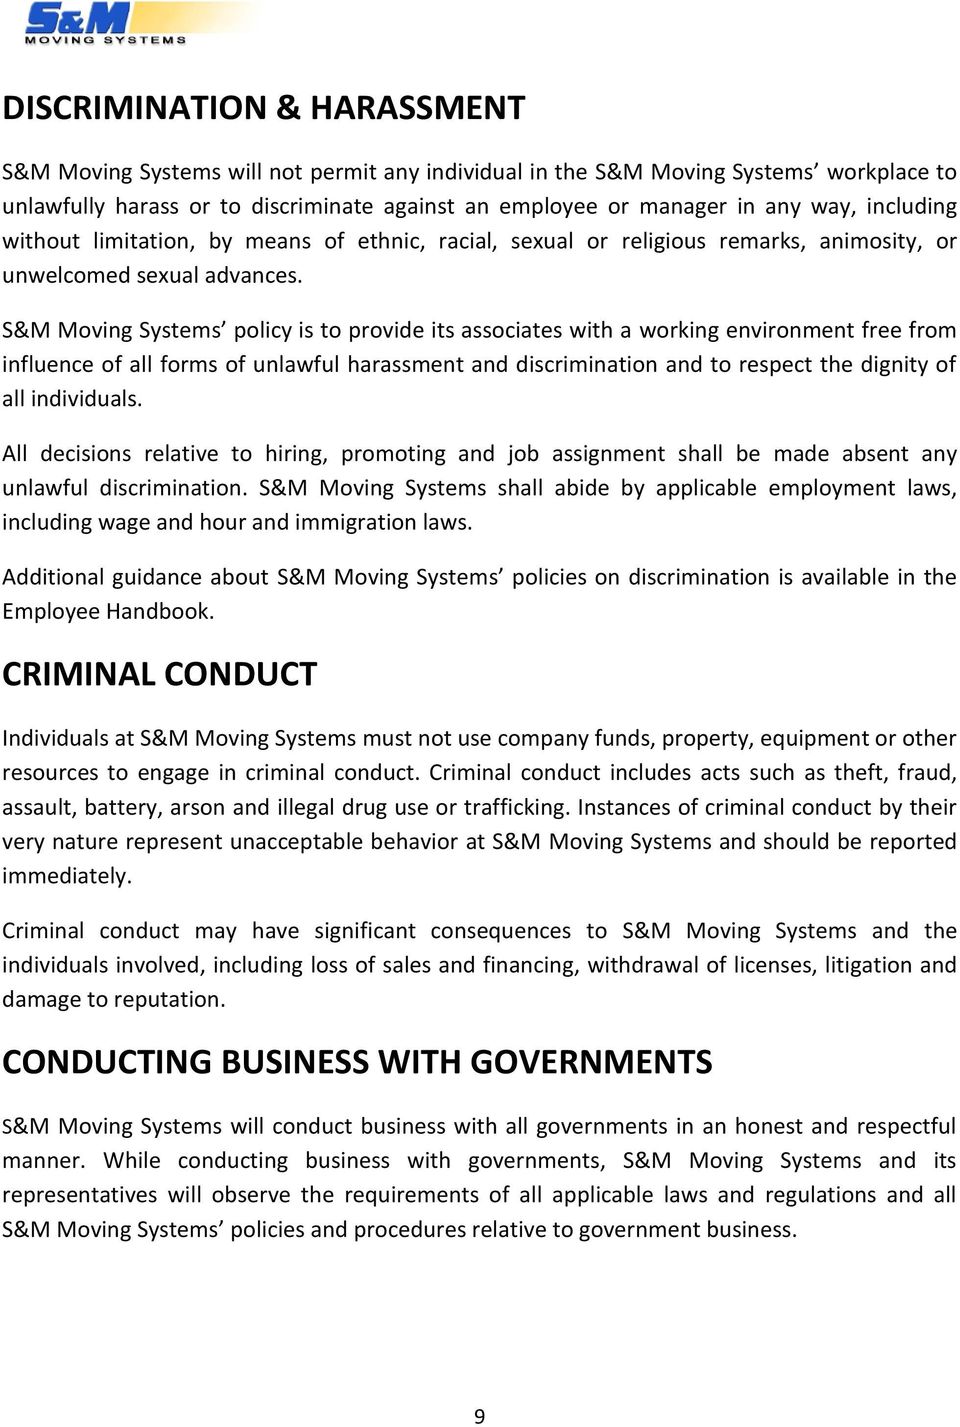 S&M Moving Systems policy is to provide its associates with a working environment free from influence of all forms of unlawful harassment and discrimination and to respect the dignity of all